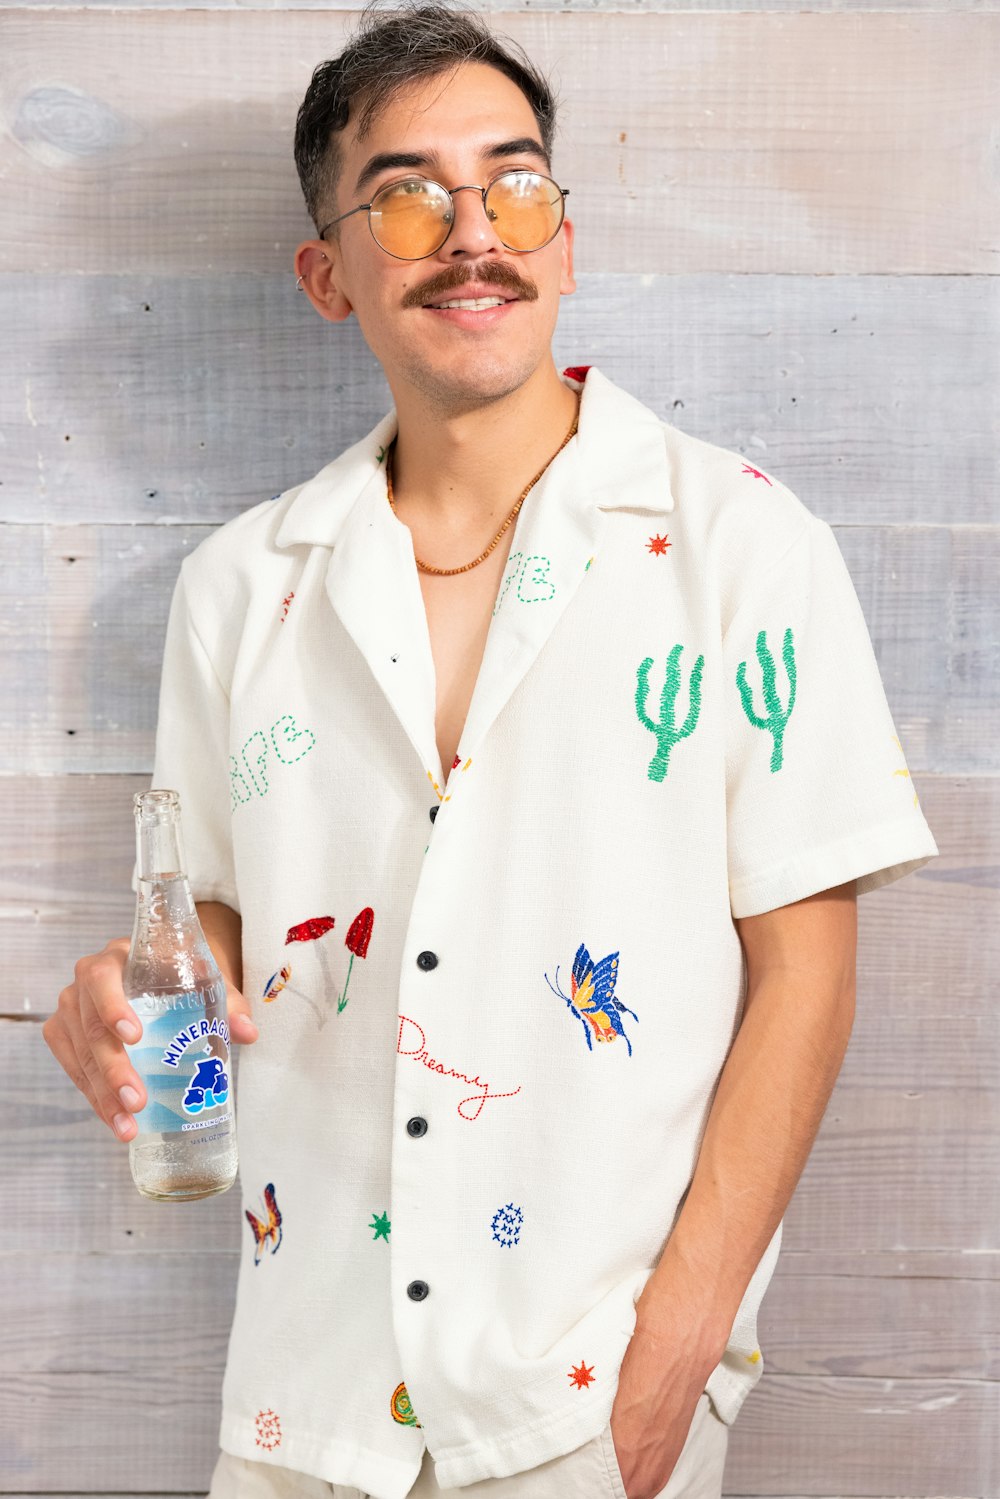 a man with a mustache and glasses holding a bottle of water